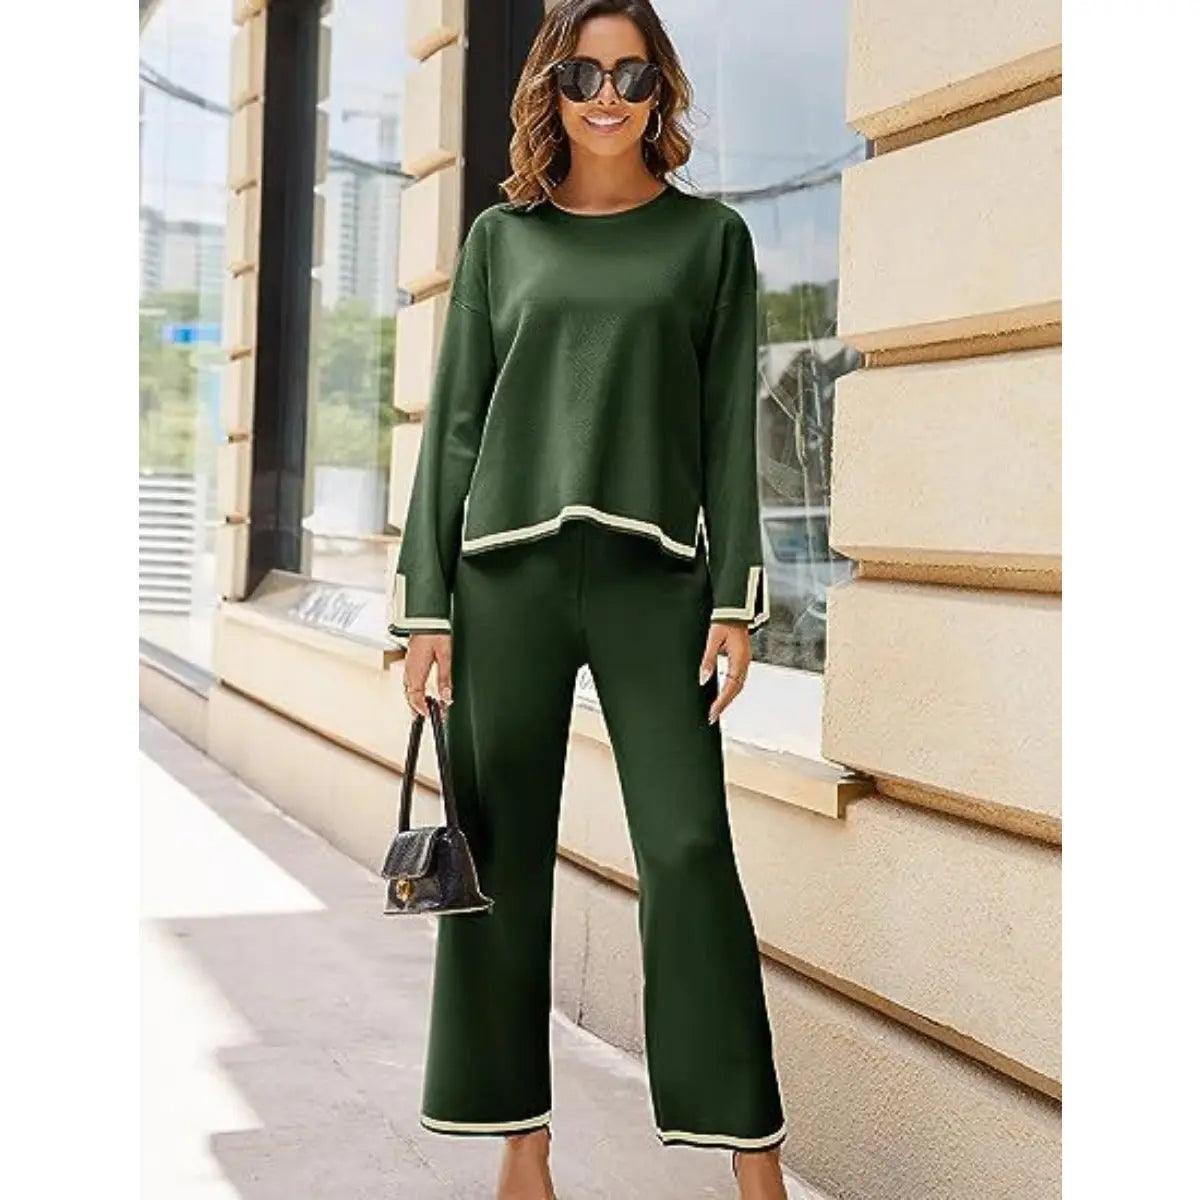 MS003 2 Piece Outfits Long Sleeve Knit Sweater Top Wide Leg Pants Lounge Sets - Mariam's Collection